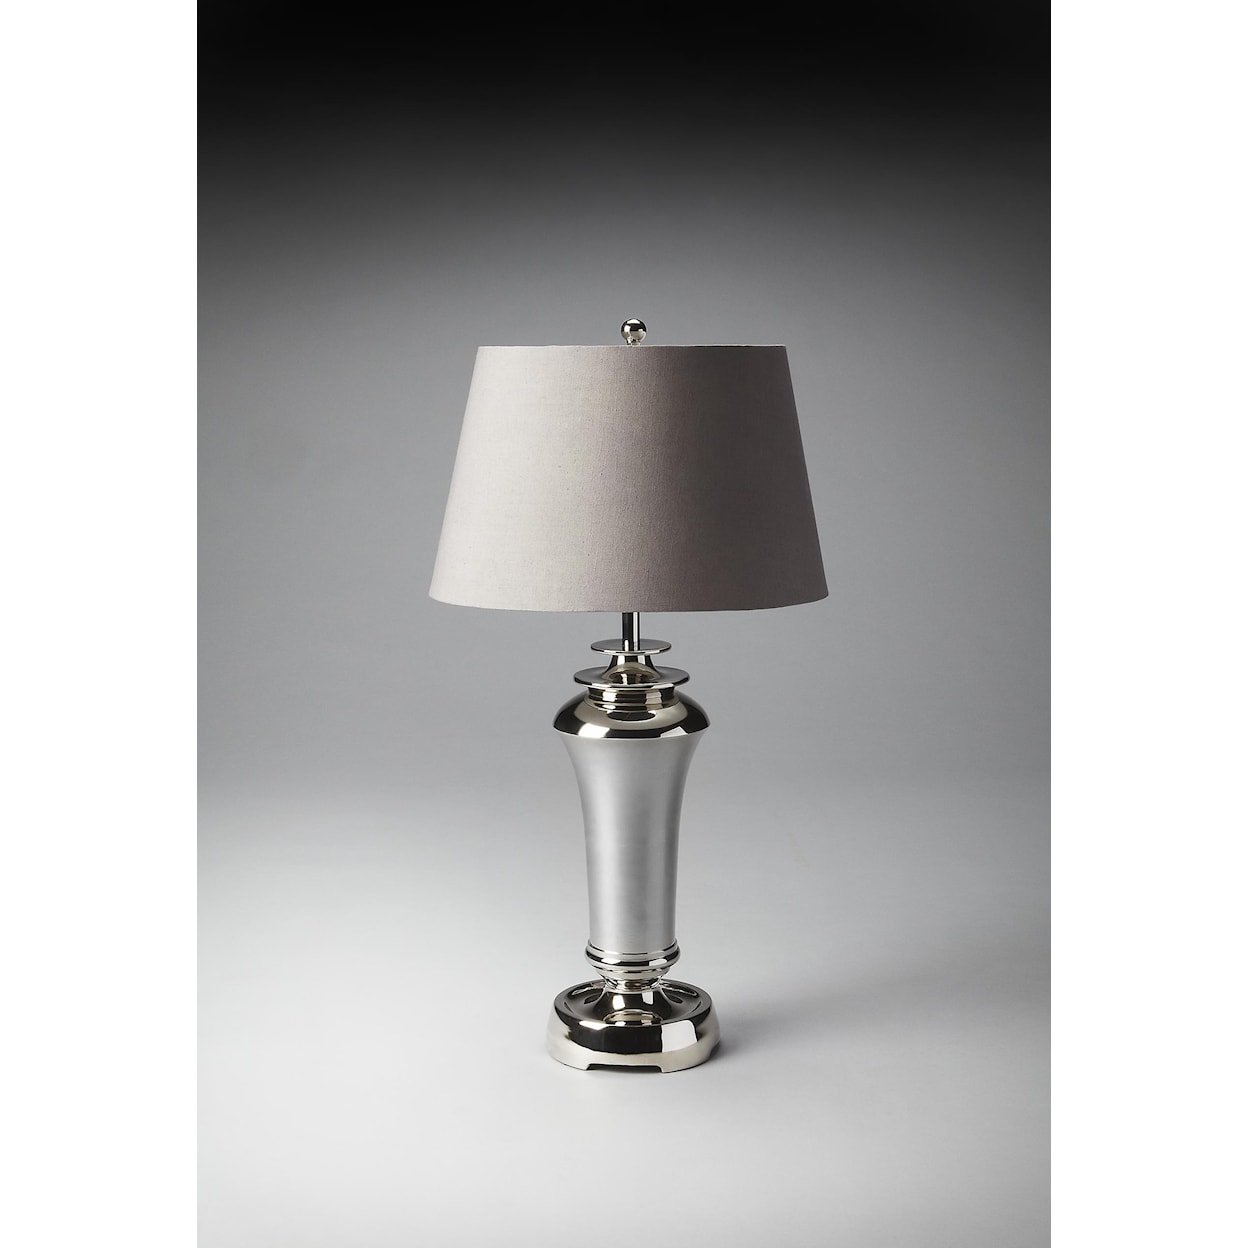 Butler Specialty Company Hors D'oeuvres Table Lamp